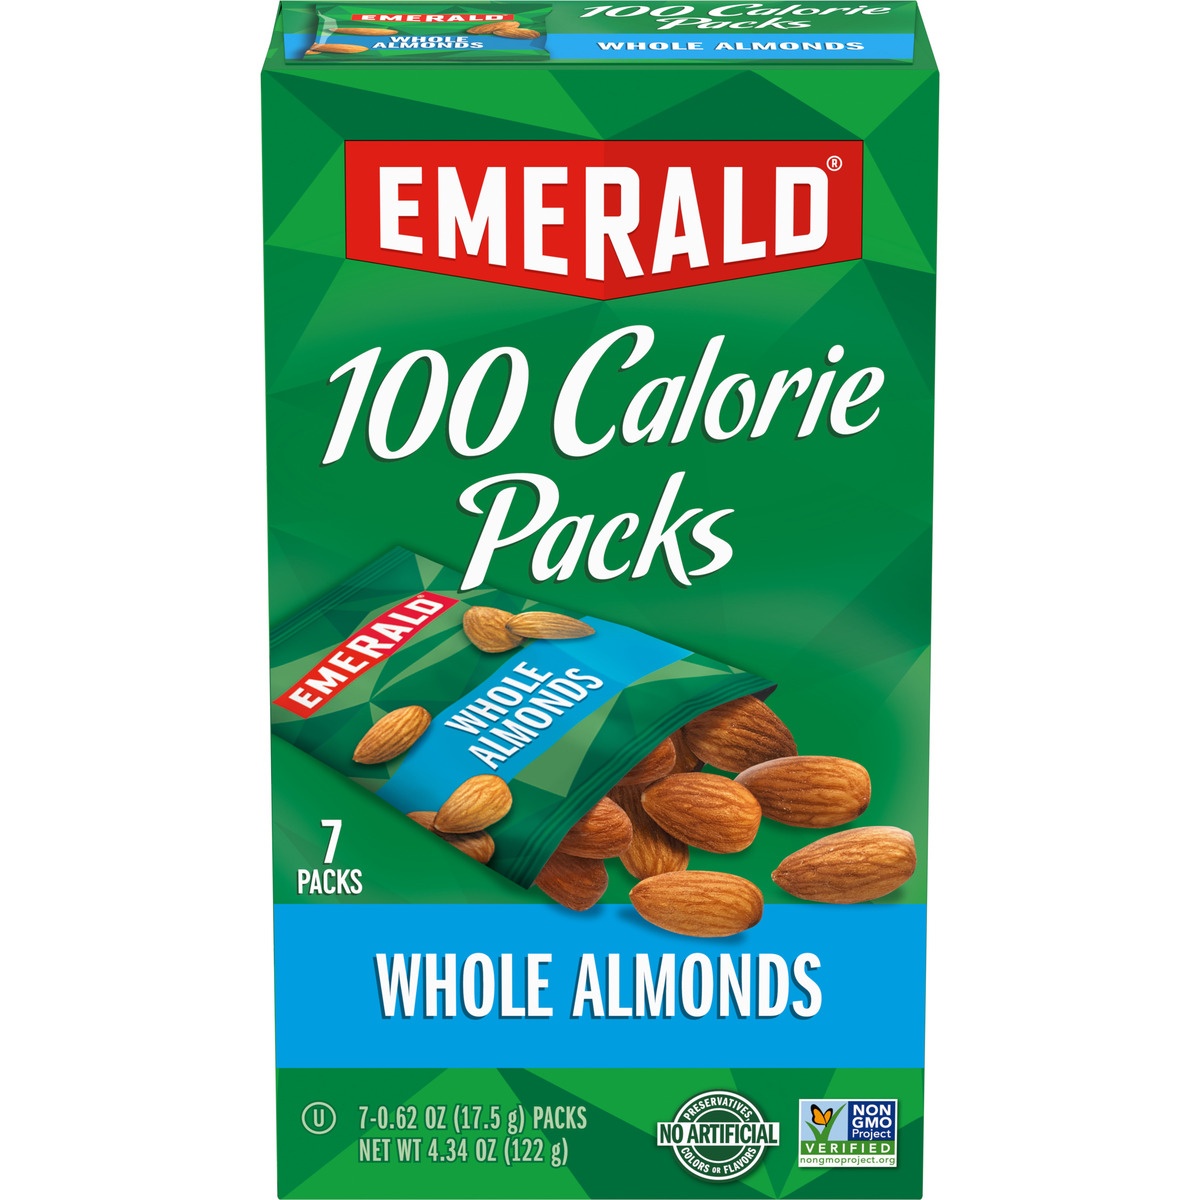 slide 11 of 11, Emerald Natural Almonds 100 Calorie Packs, 7 ct